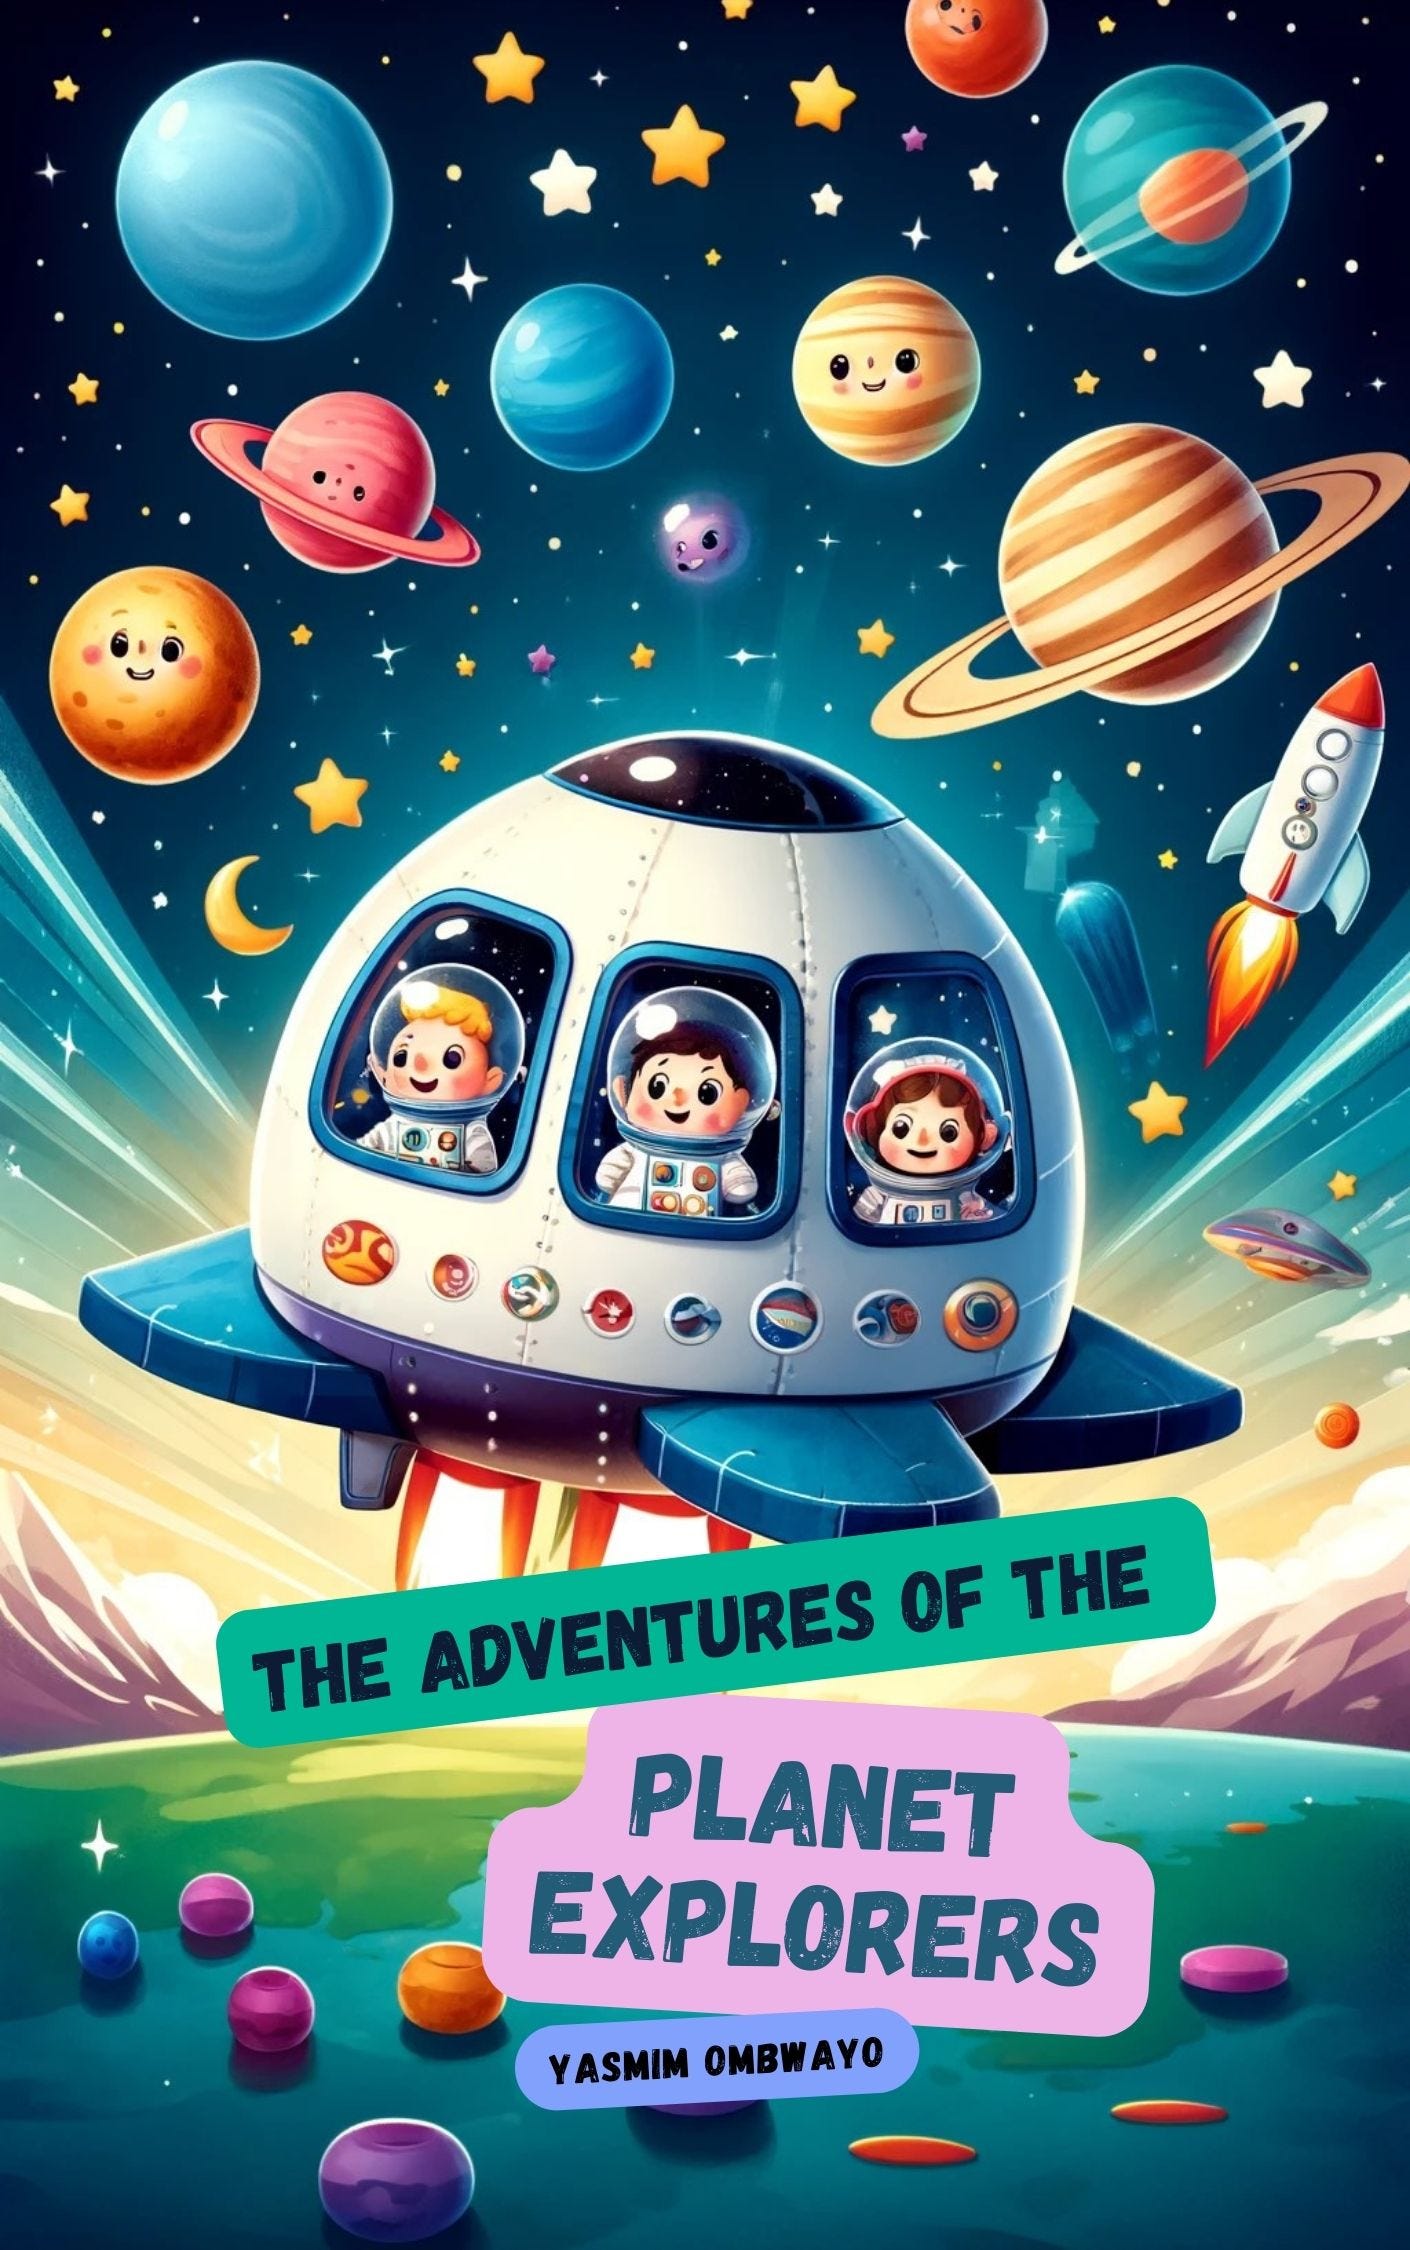 The Adventures of the Planet Explorers: A Galactic Journey Every Child